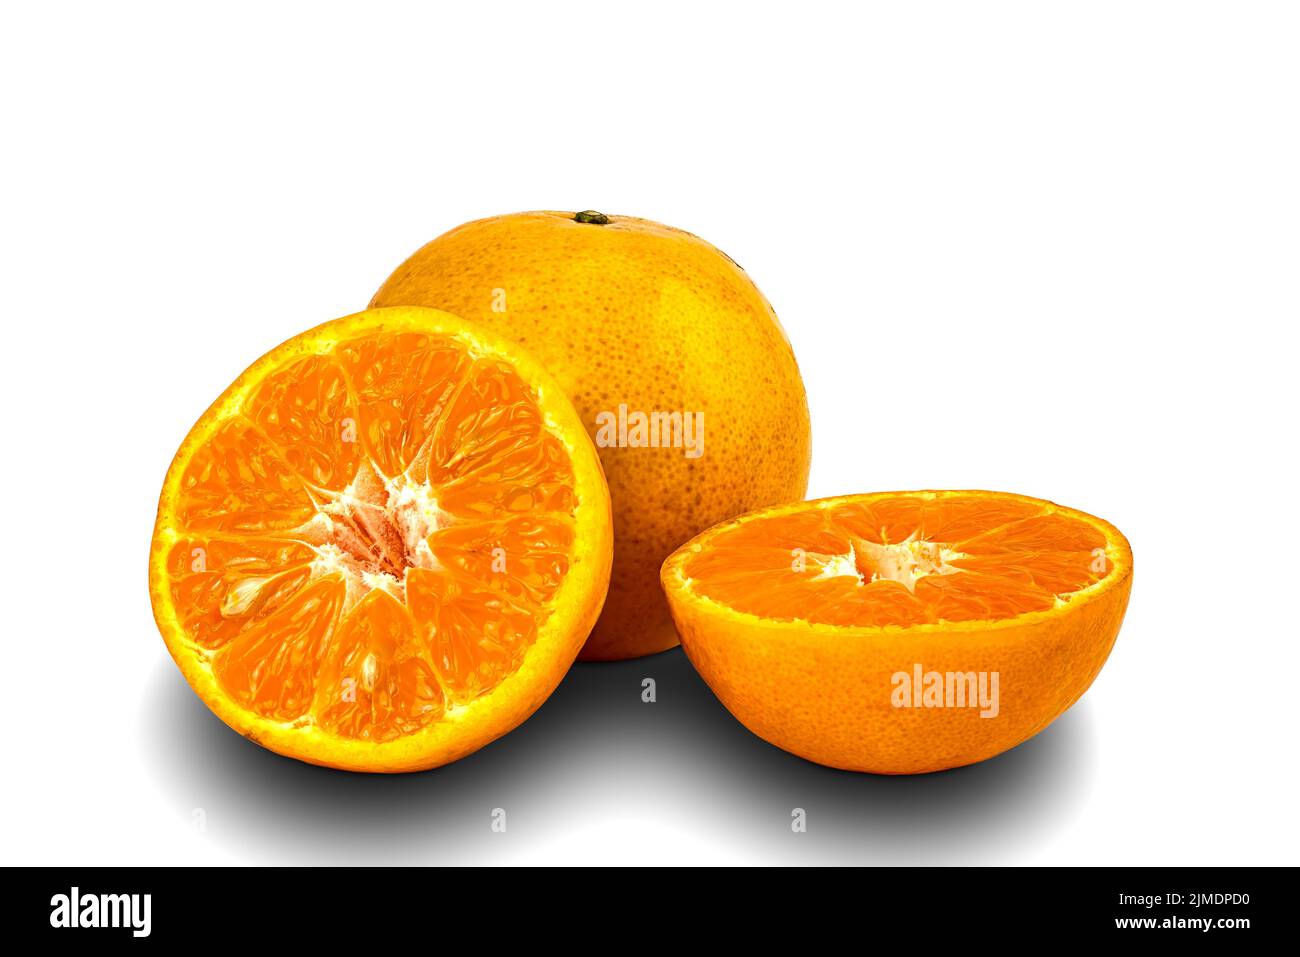 Whole and haves ripe oranges on white background. Stock Photo